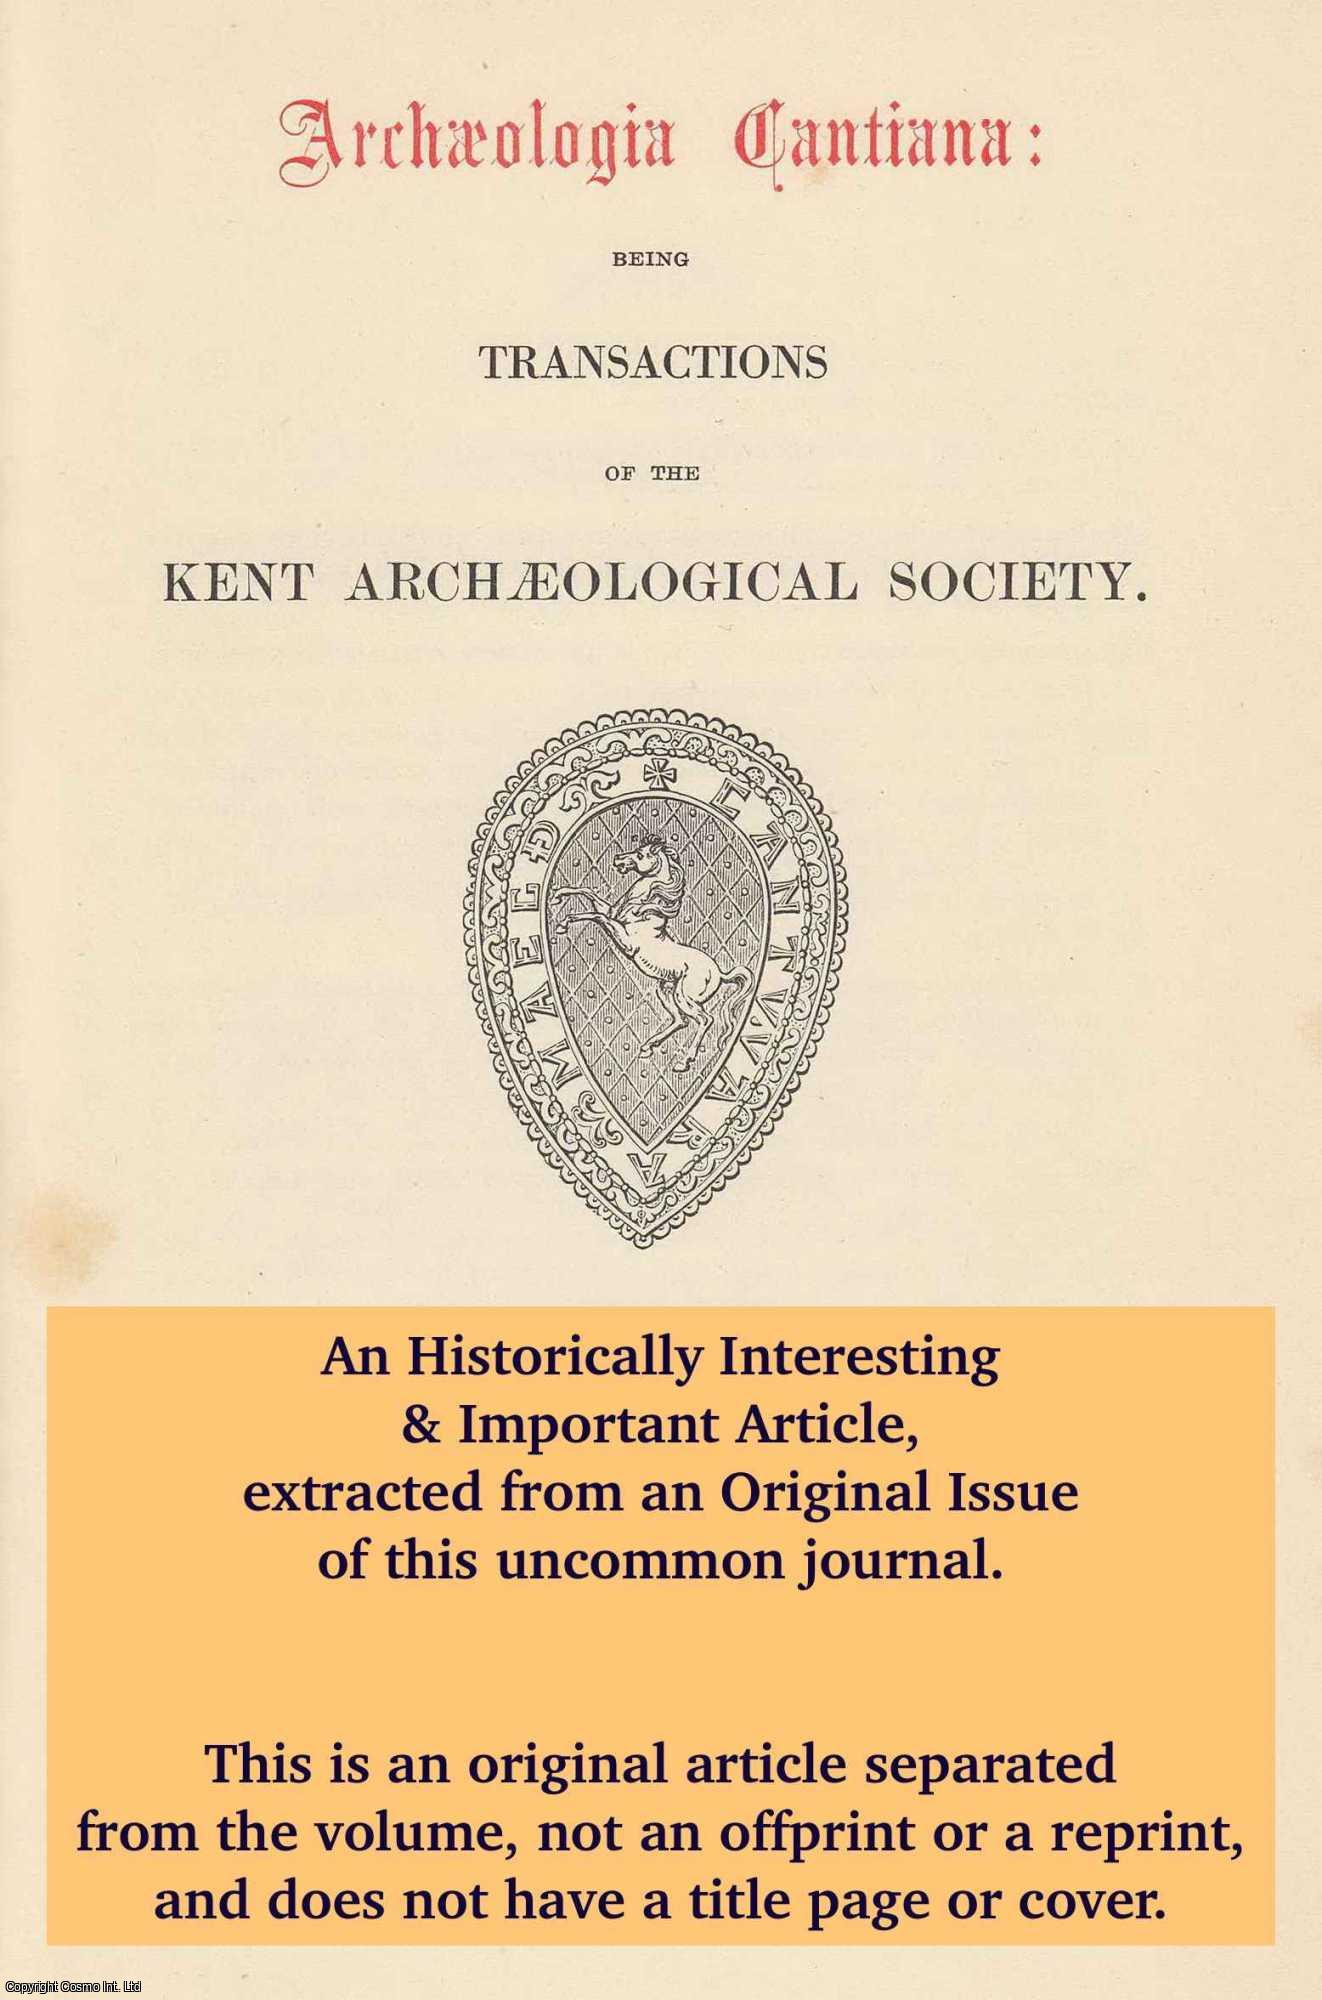 Felix Hull - Sidney of Penshurst - Robert, 2nd Earl of Leicester. An original article from The Archaeologia Cantiana: Transactions of The Kent Archaeological Society, 1993.